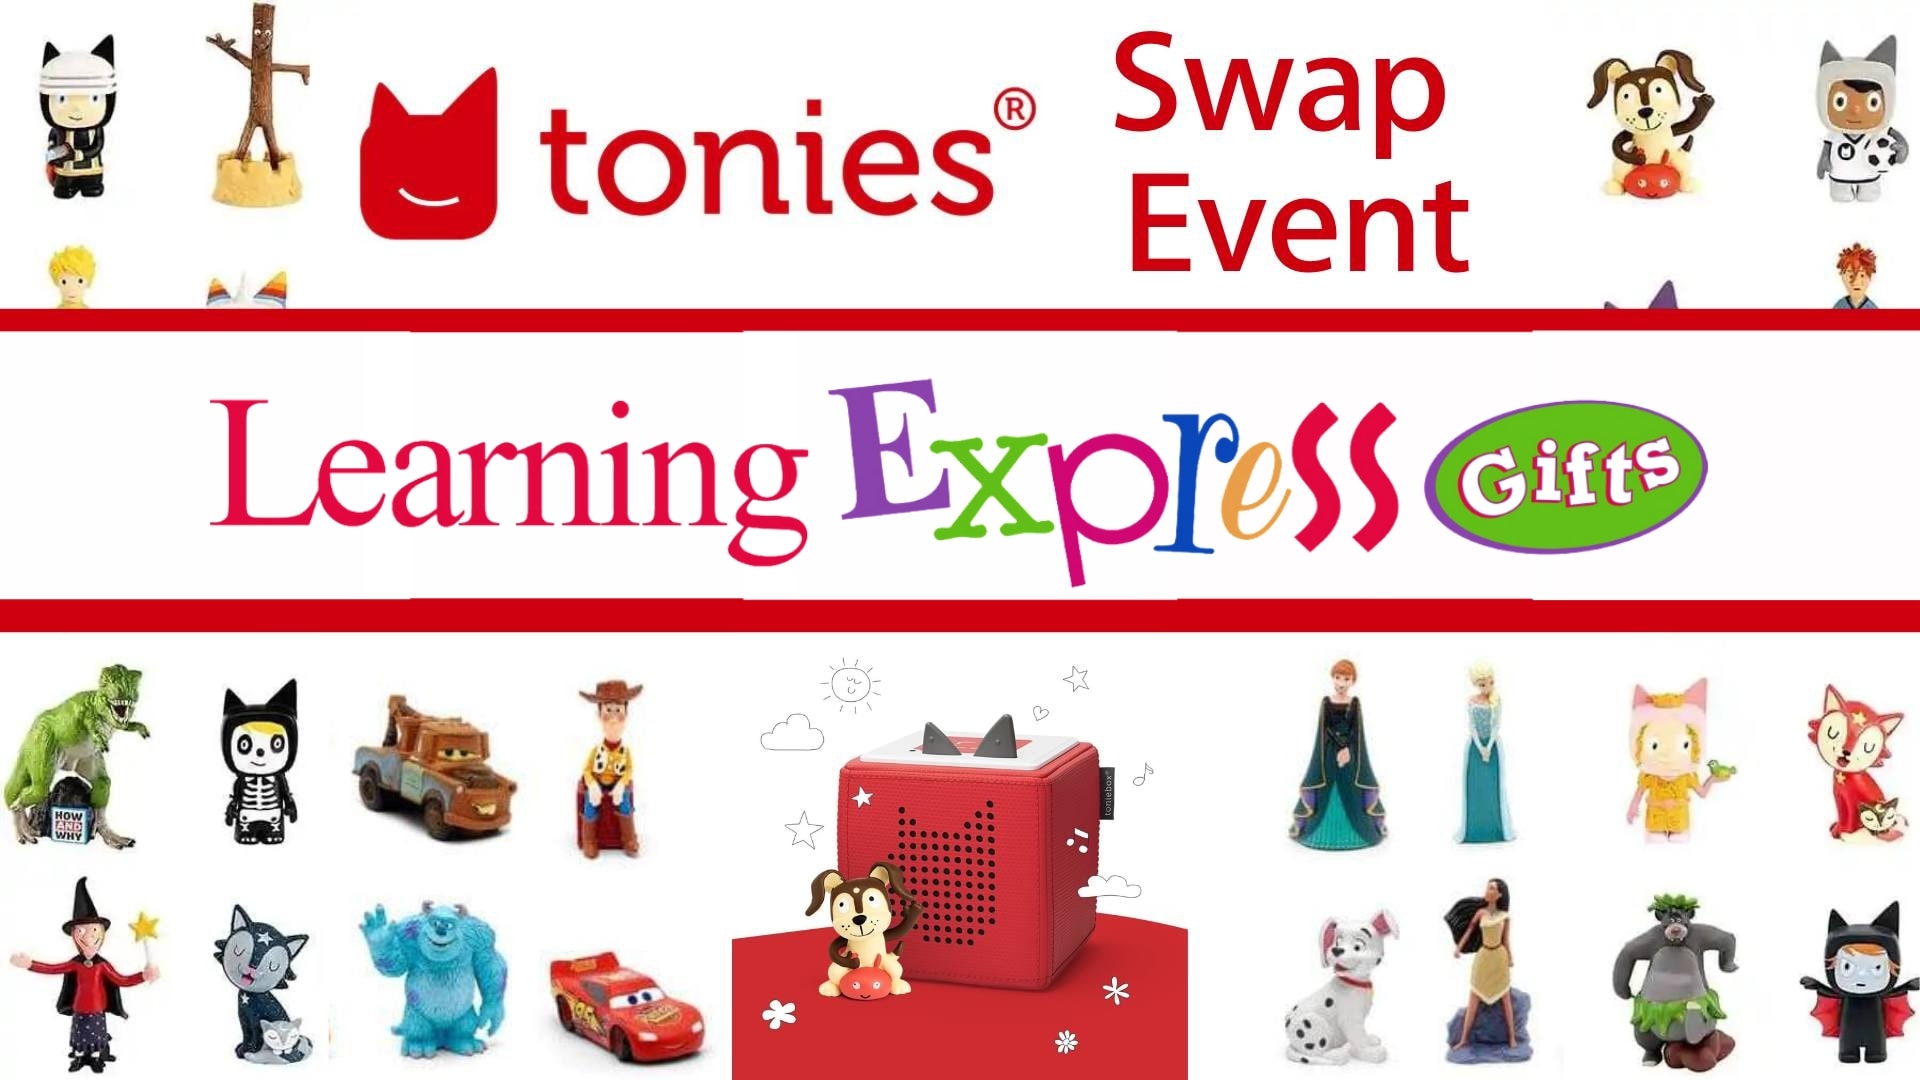 Tonie Swap at Learning Express Toys